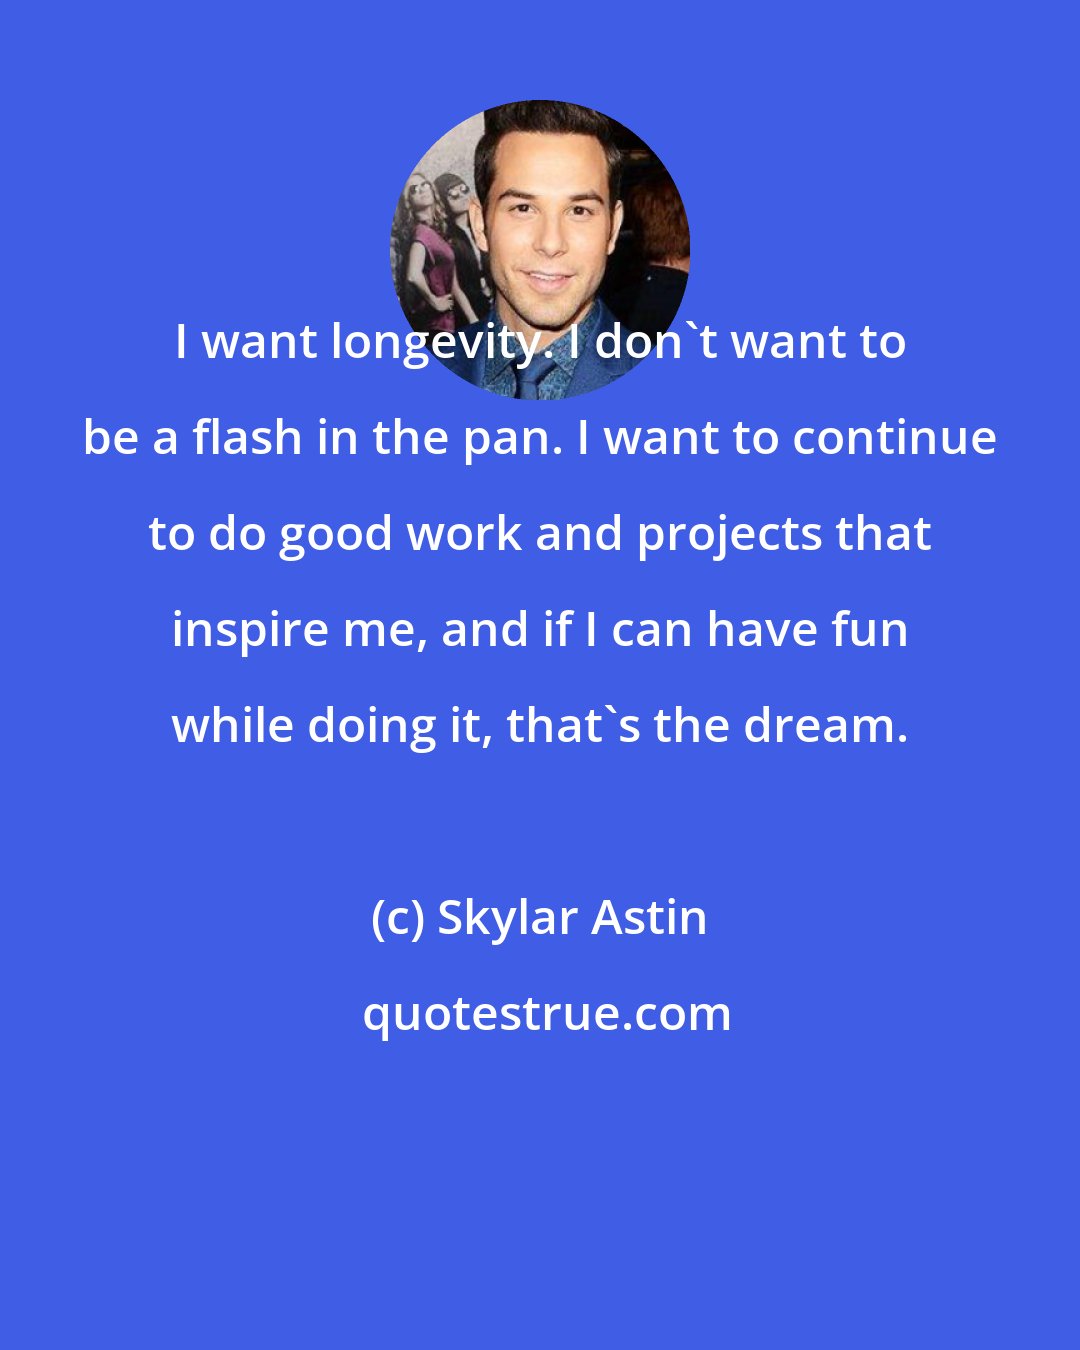 Skylar Astin: I want longevity. I don't want to be a flash in the pan. I want to continue to do good work and projects that inspire me, and if I can have fun while doing it, that's the dream.